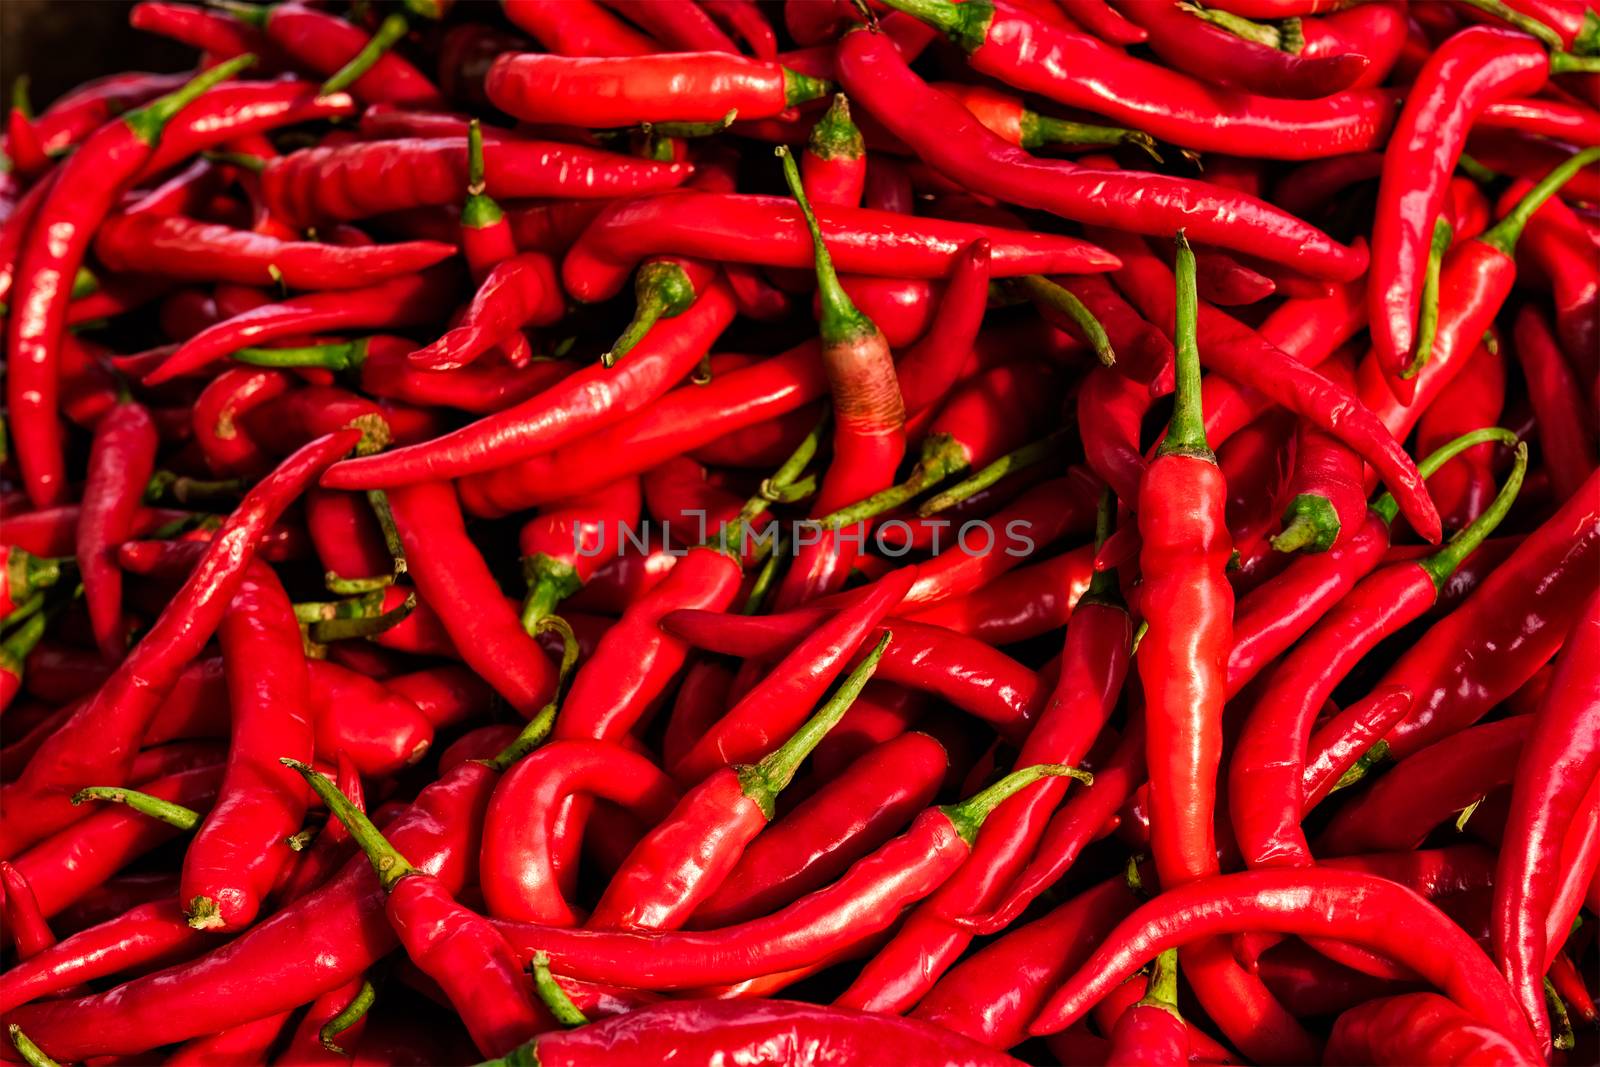 Red spicy chili peppers by dimol